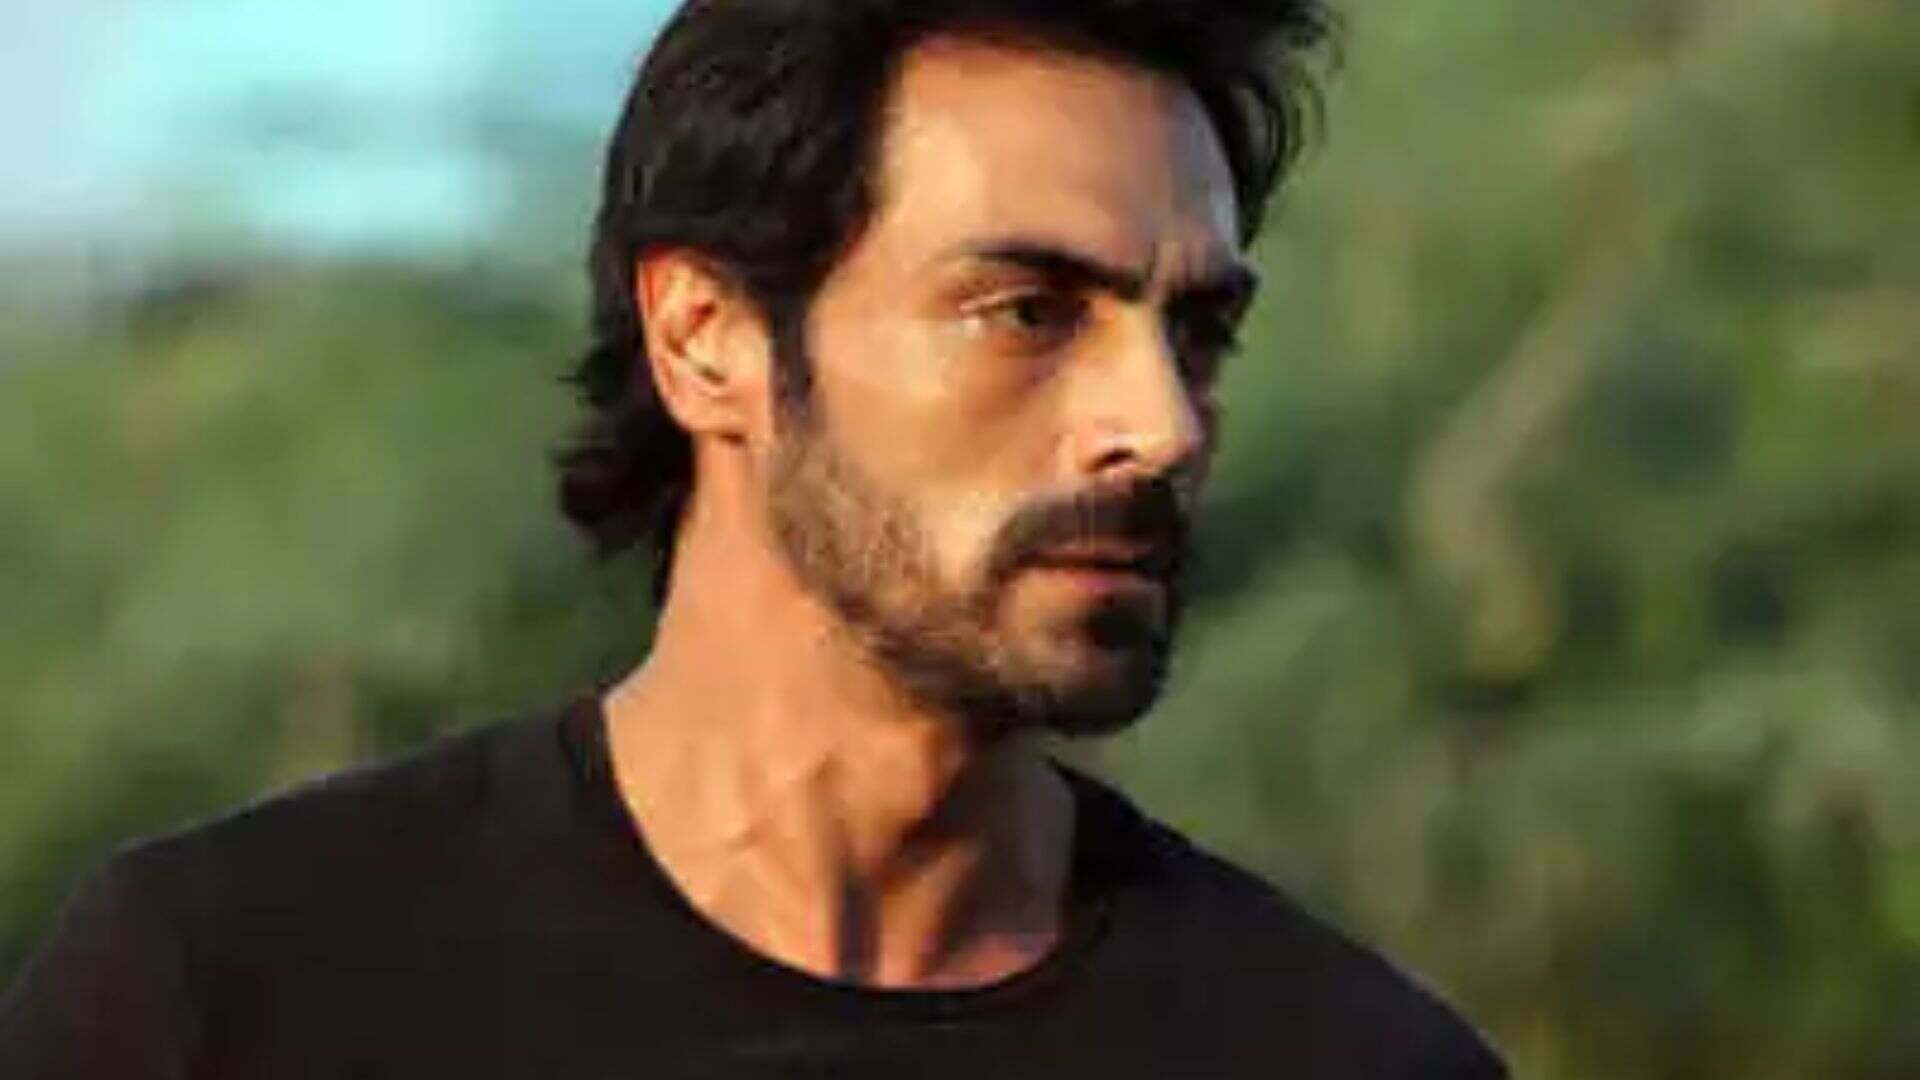 Microsoft Outage Forces Arjun Rampal To Book New Flight